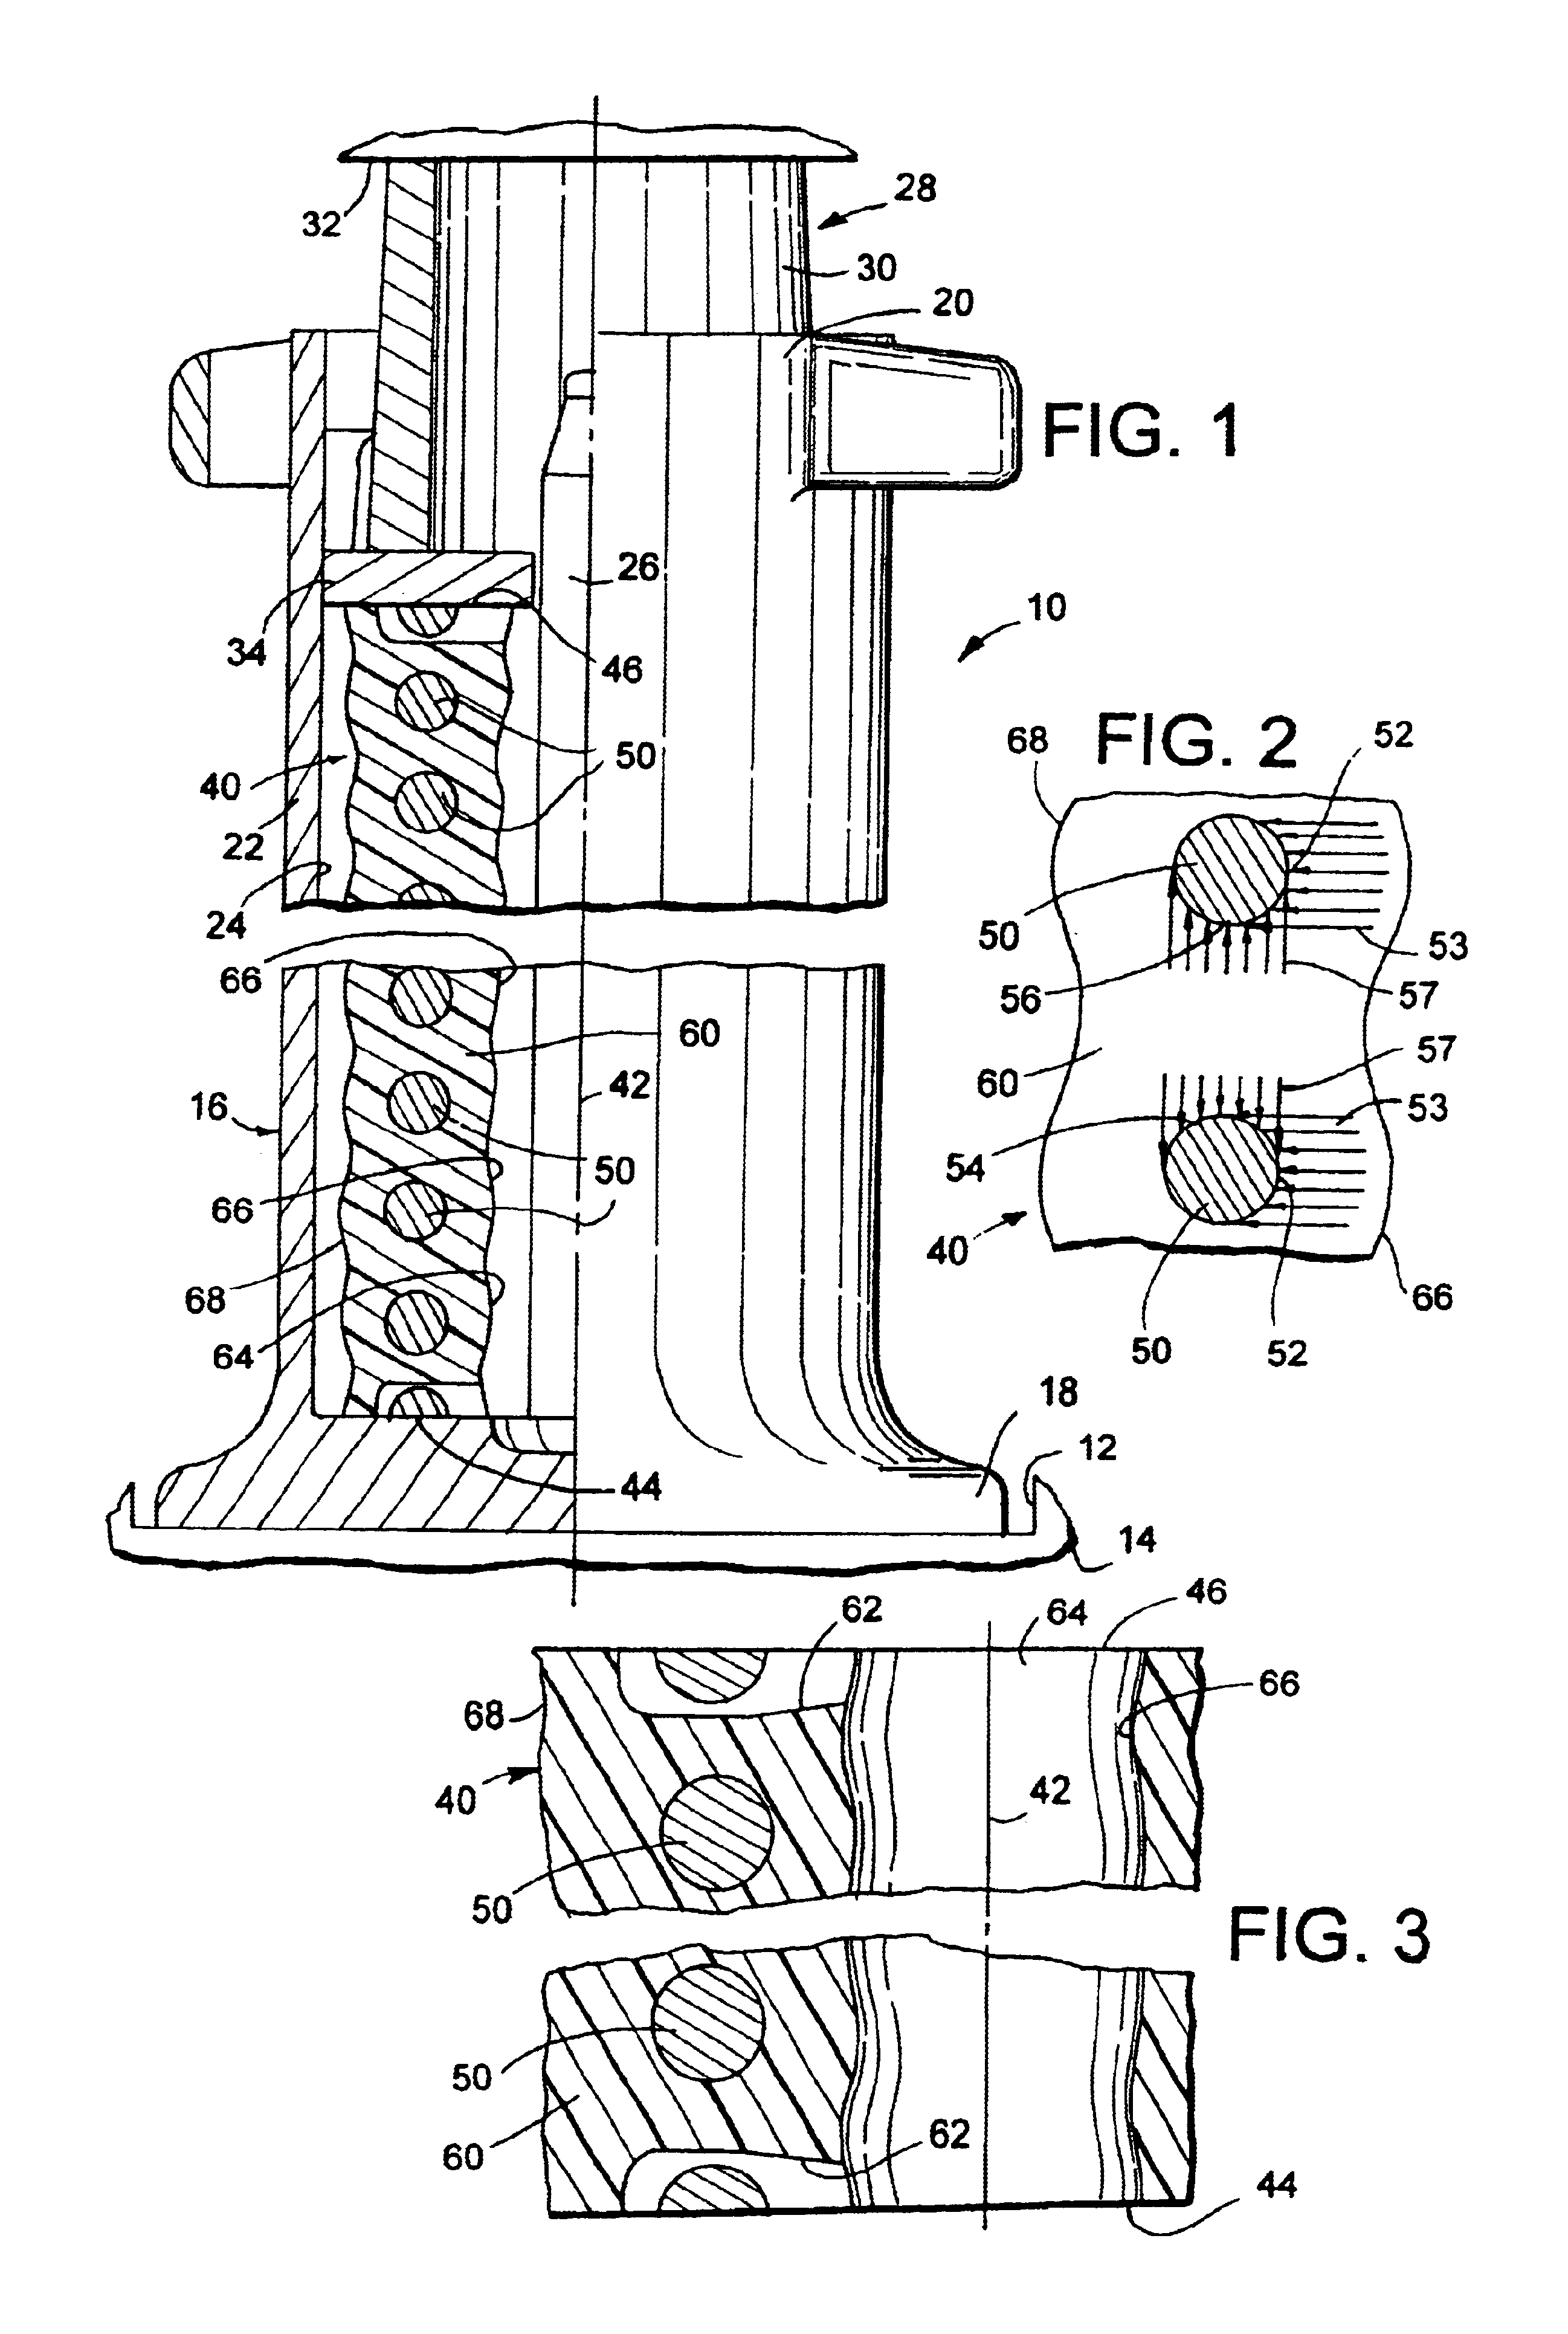 Elastomeric spring assembly for a railcar and method of making same